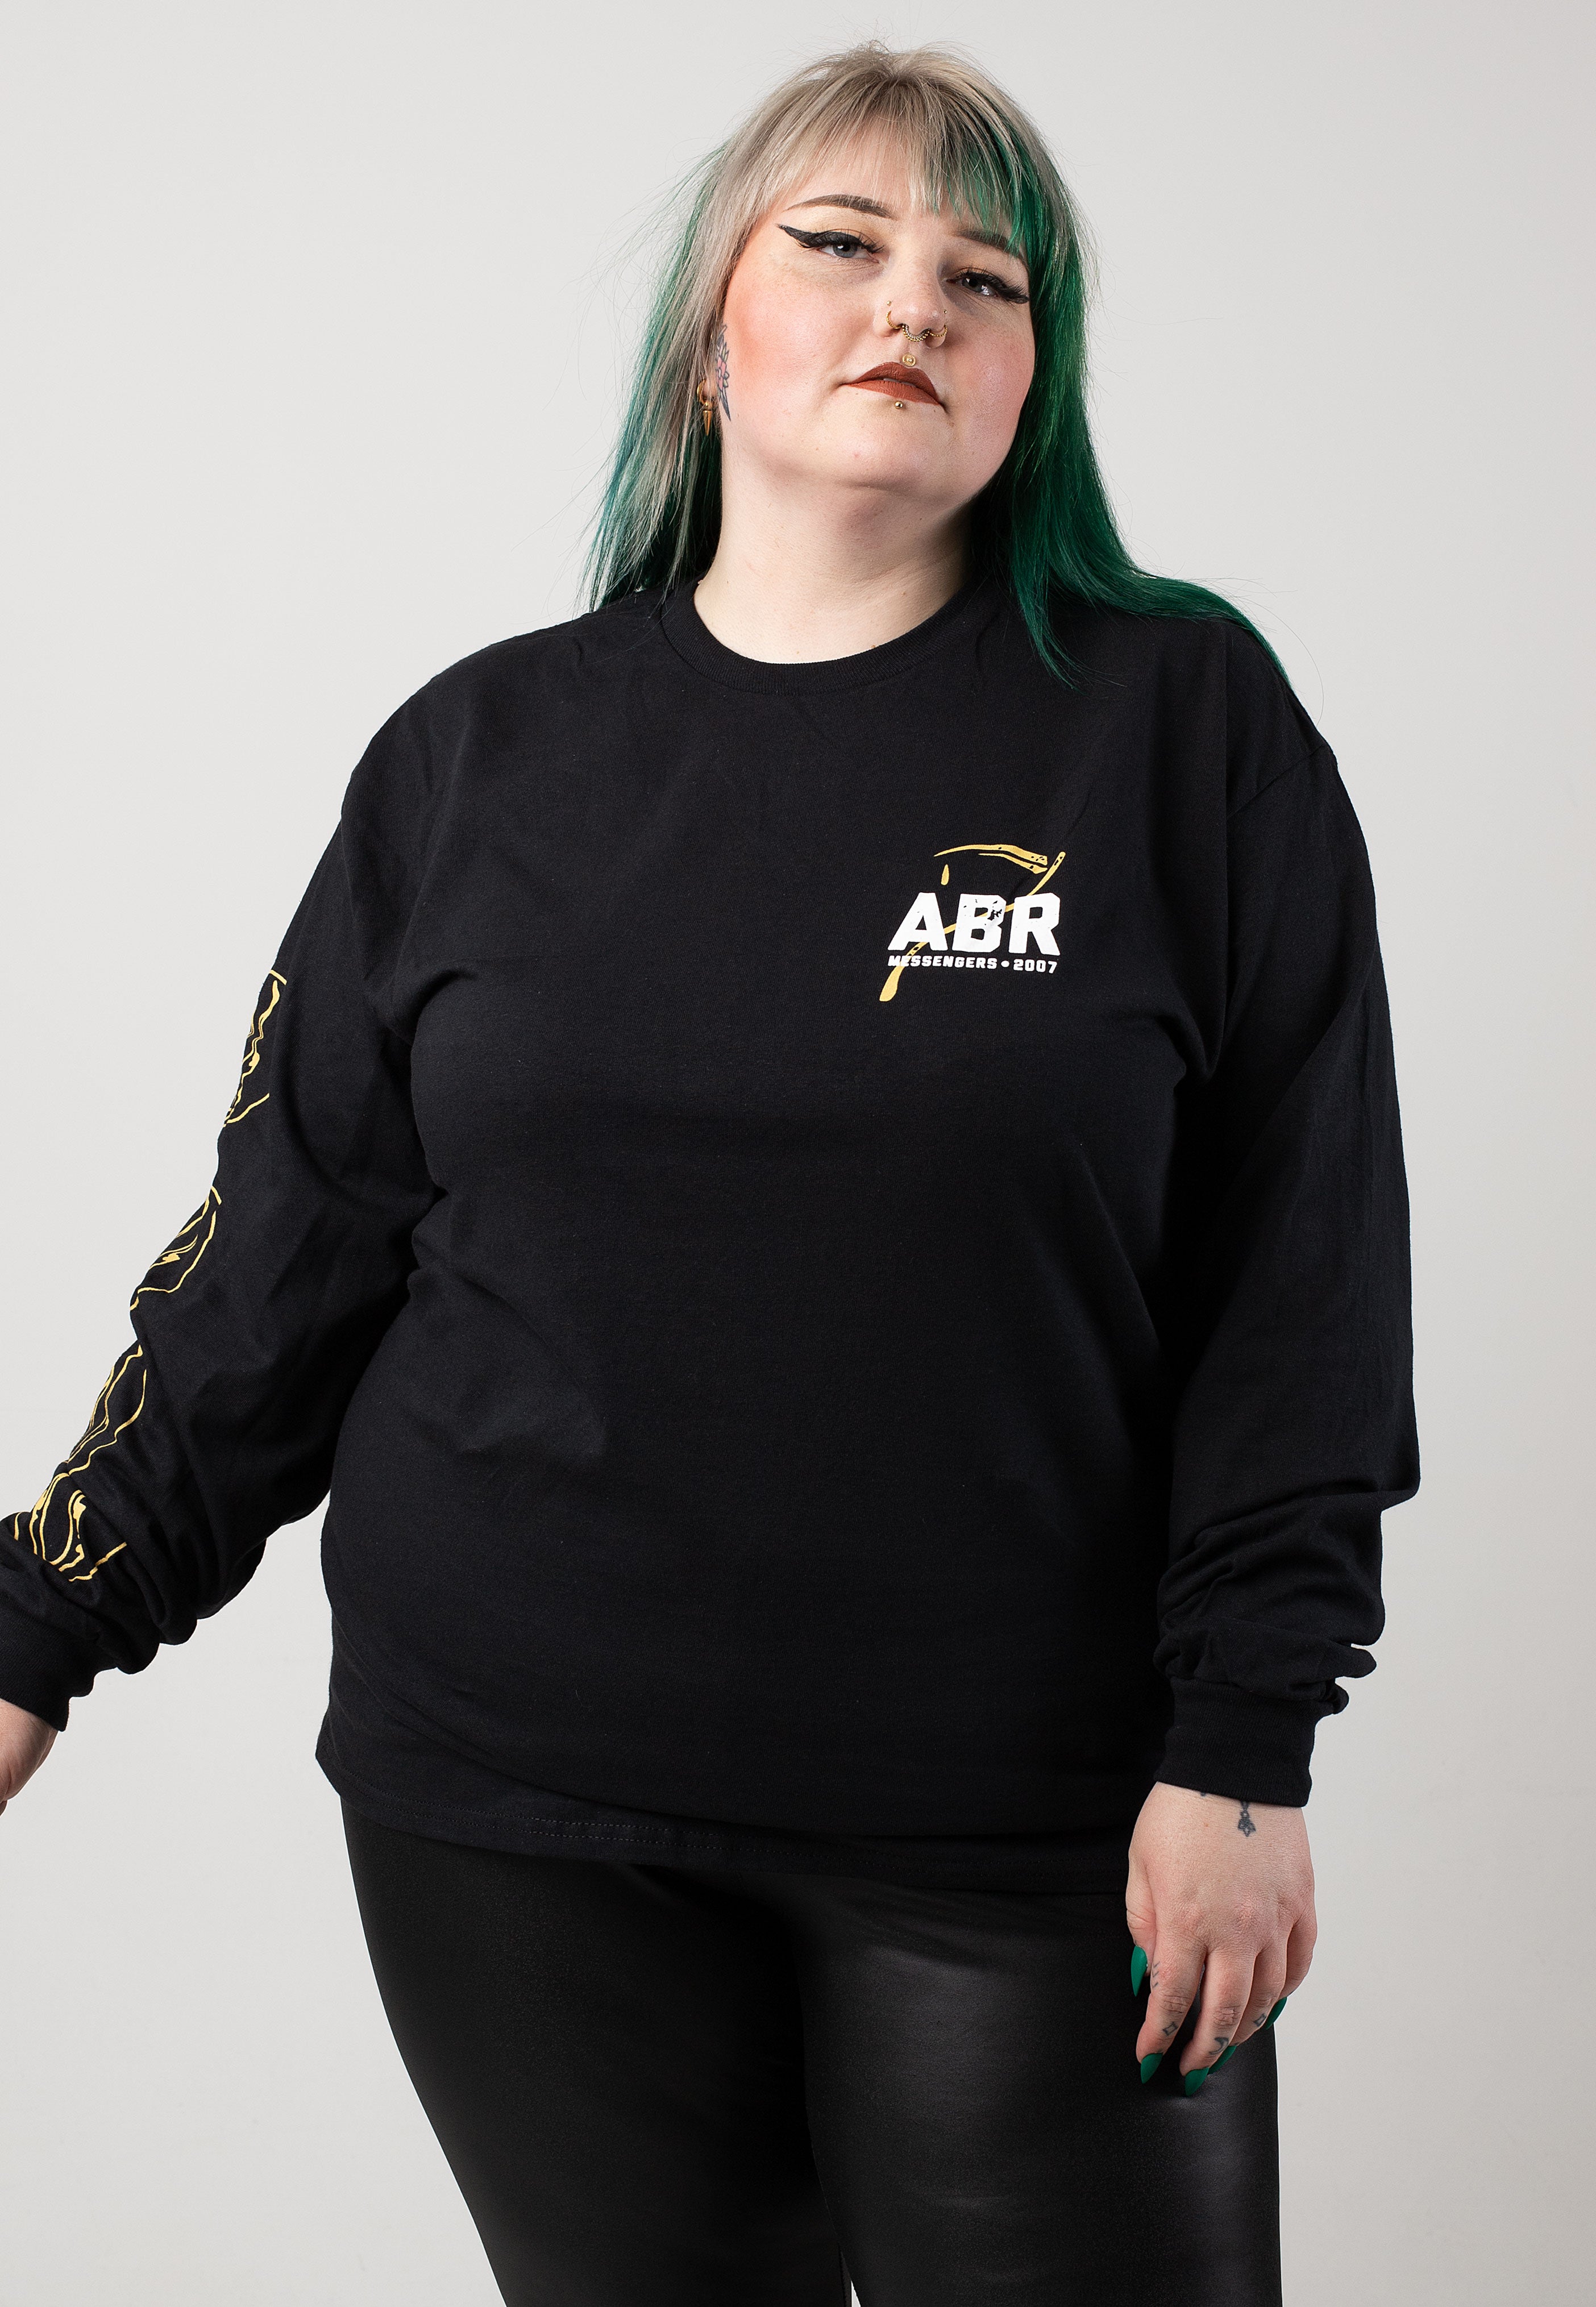 August Burns Red - All That You Loved - Longsleeve | Women-Image